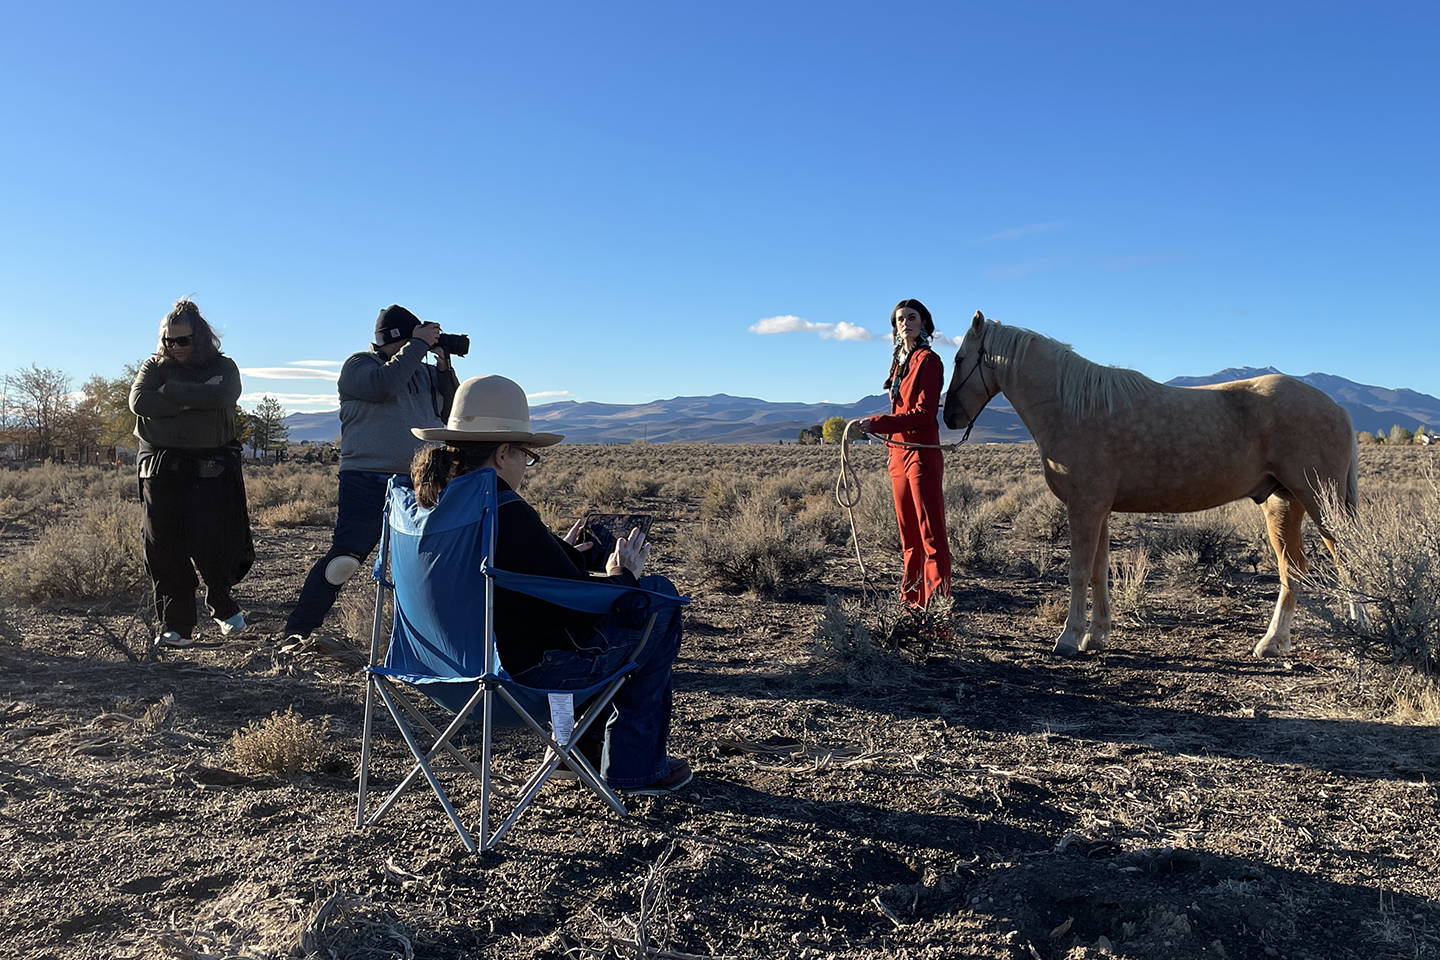 STORIES FROM THE SET: WILD HORSES